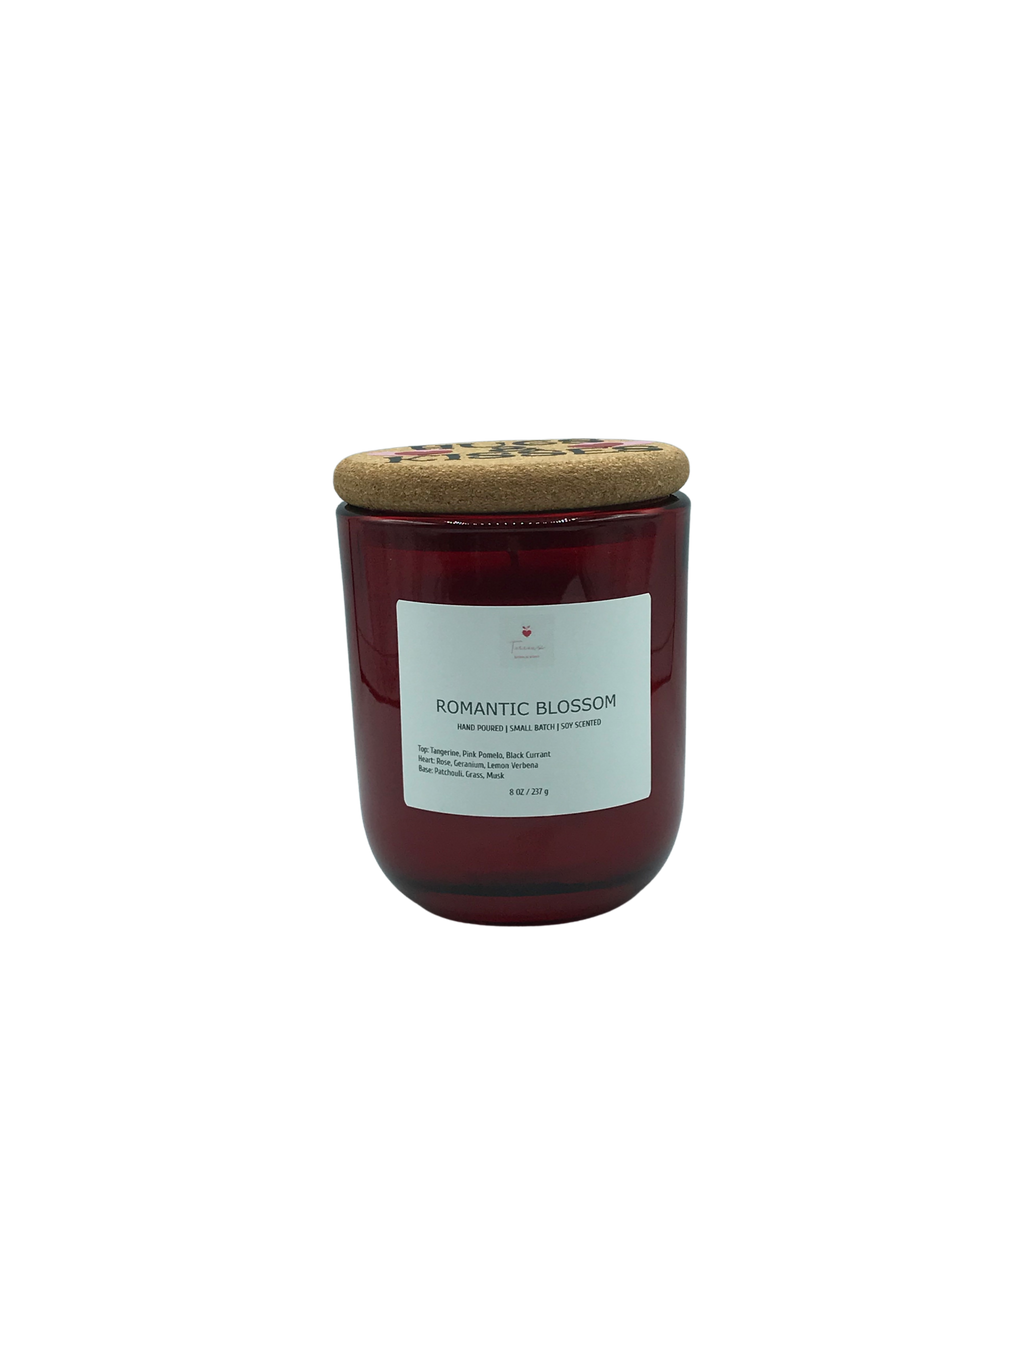 ROSE BLOSSOM SOY CANDLE